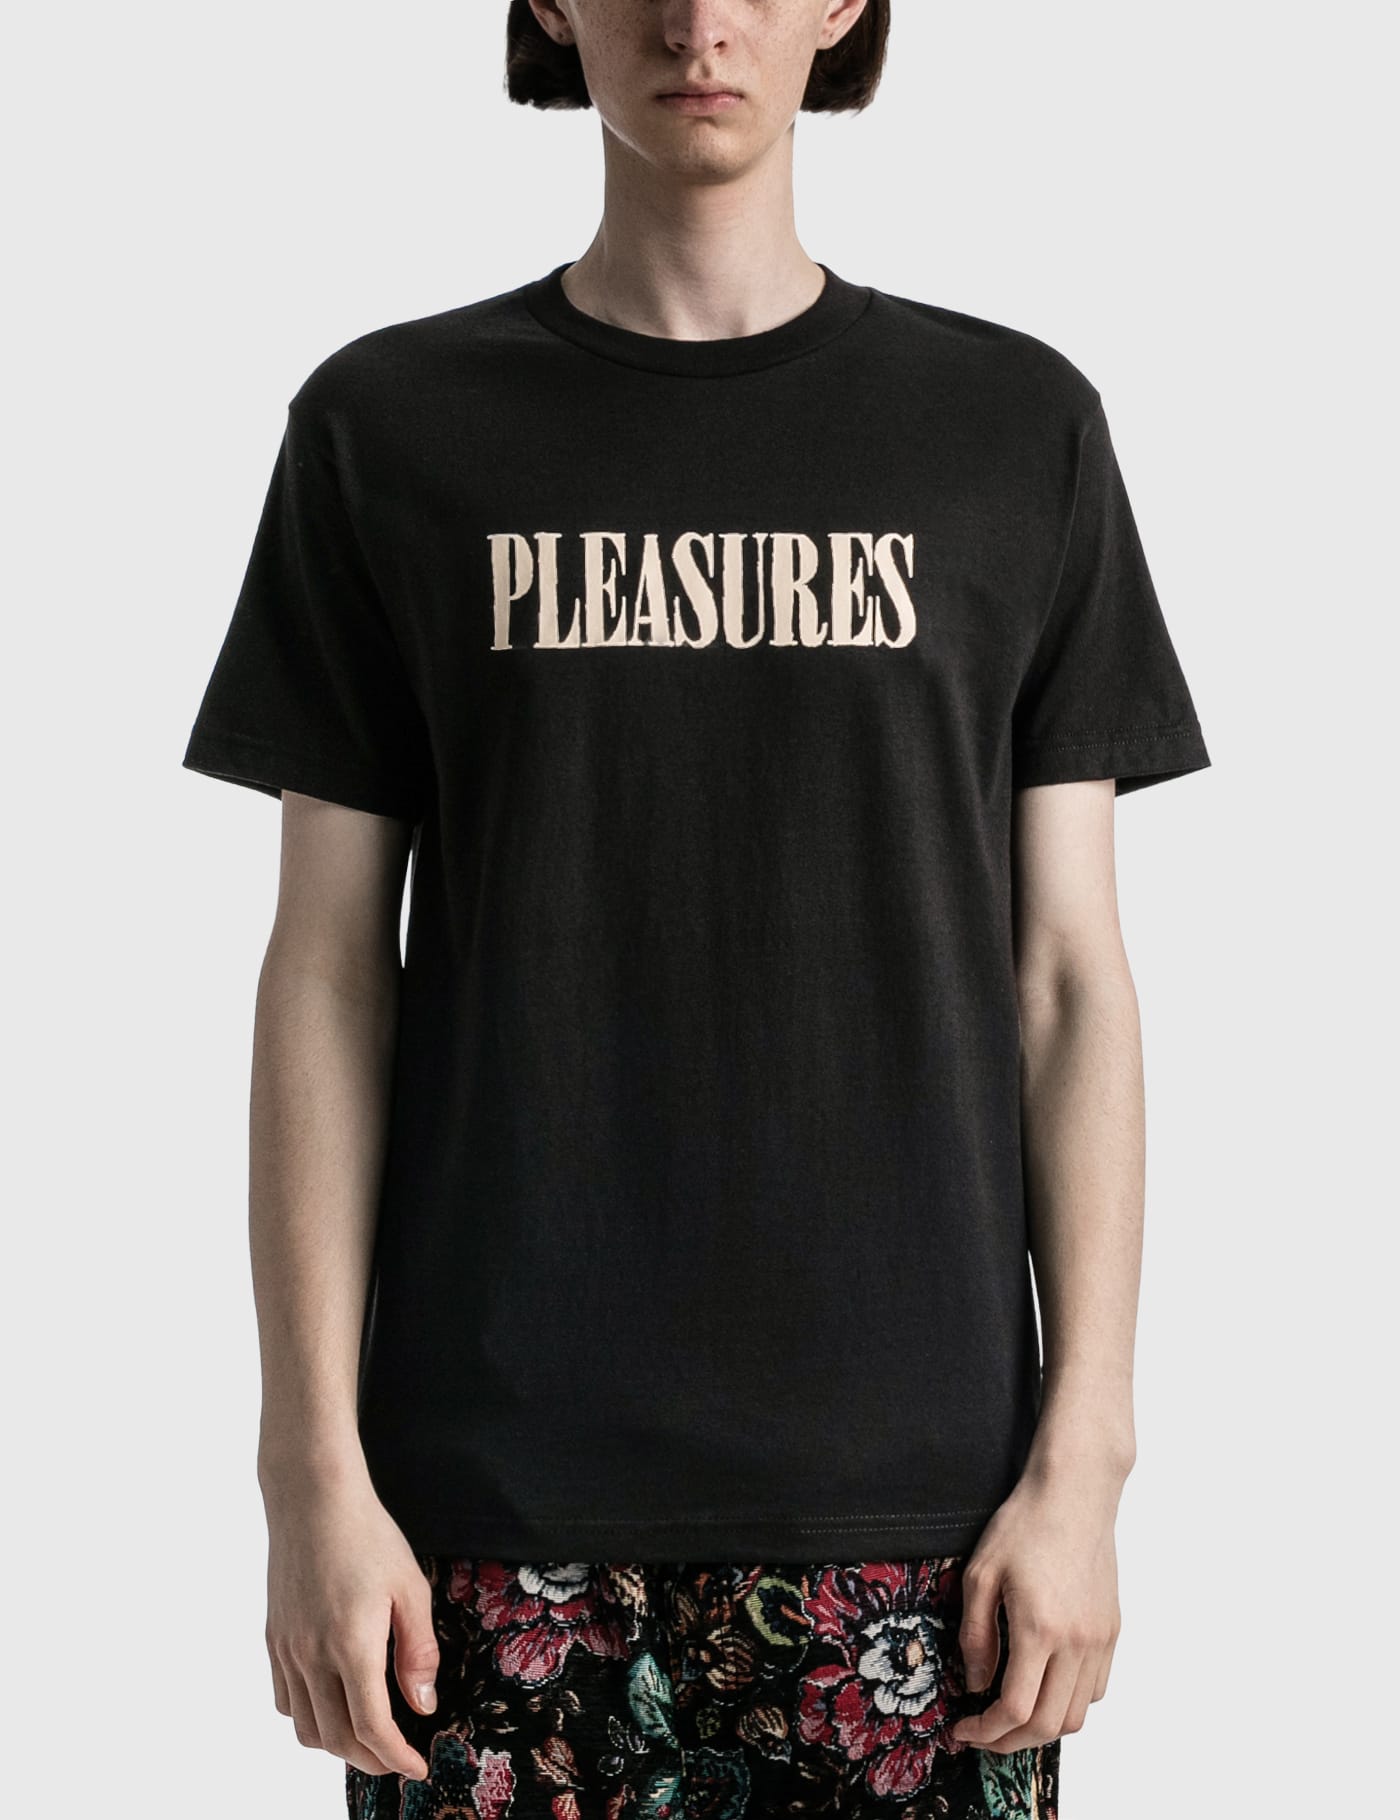 Pleasures | HBX - Globally Curated Fashion and Lifestyle by 